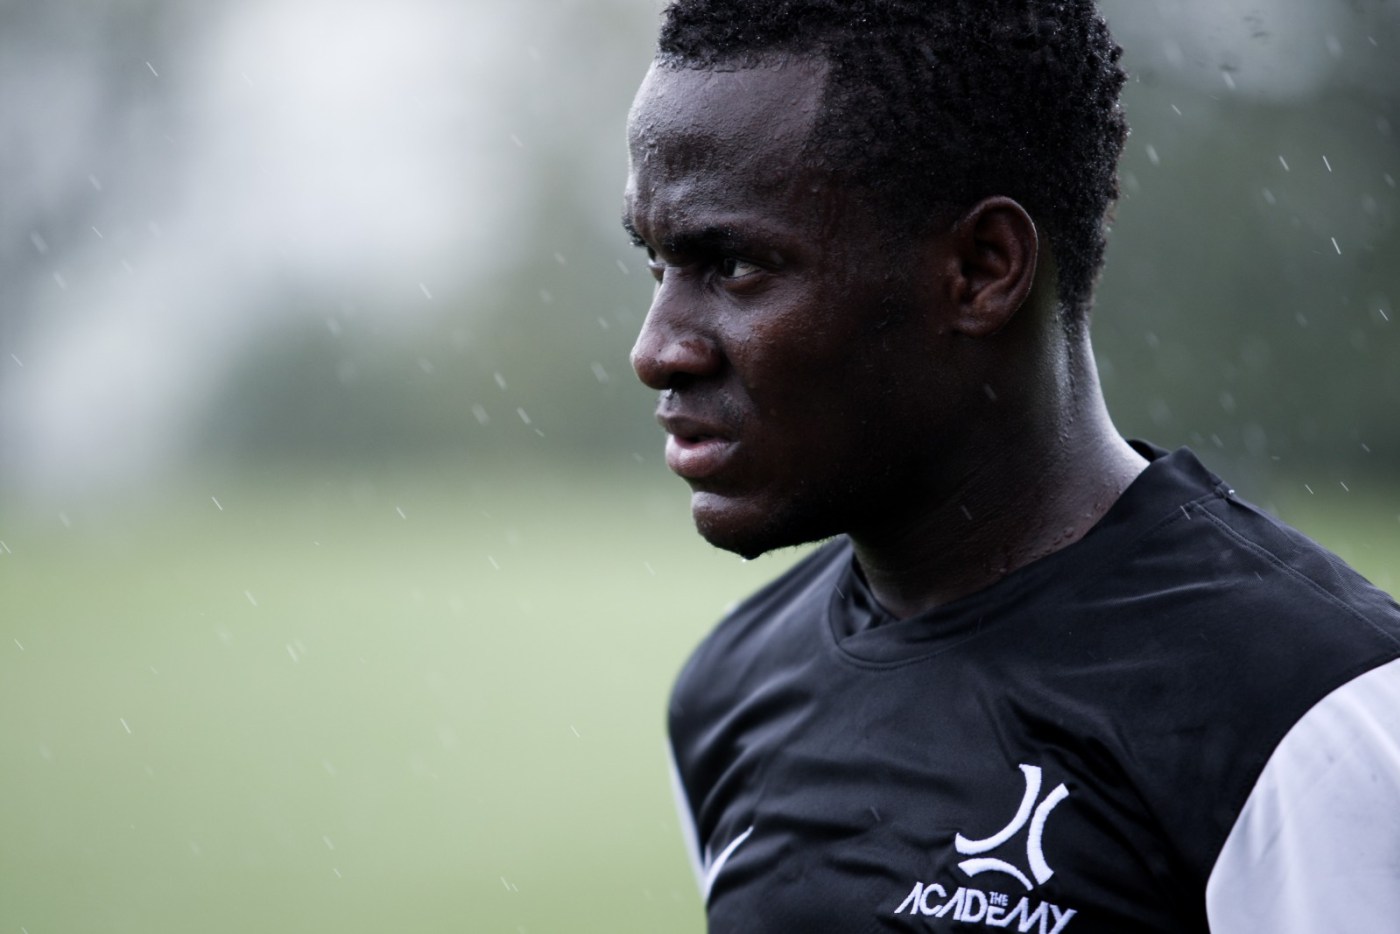 The story of David Accam and the Nike Academy